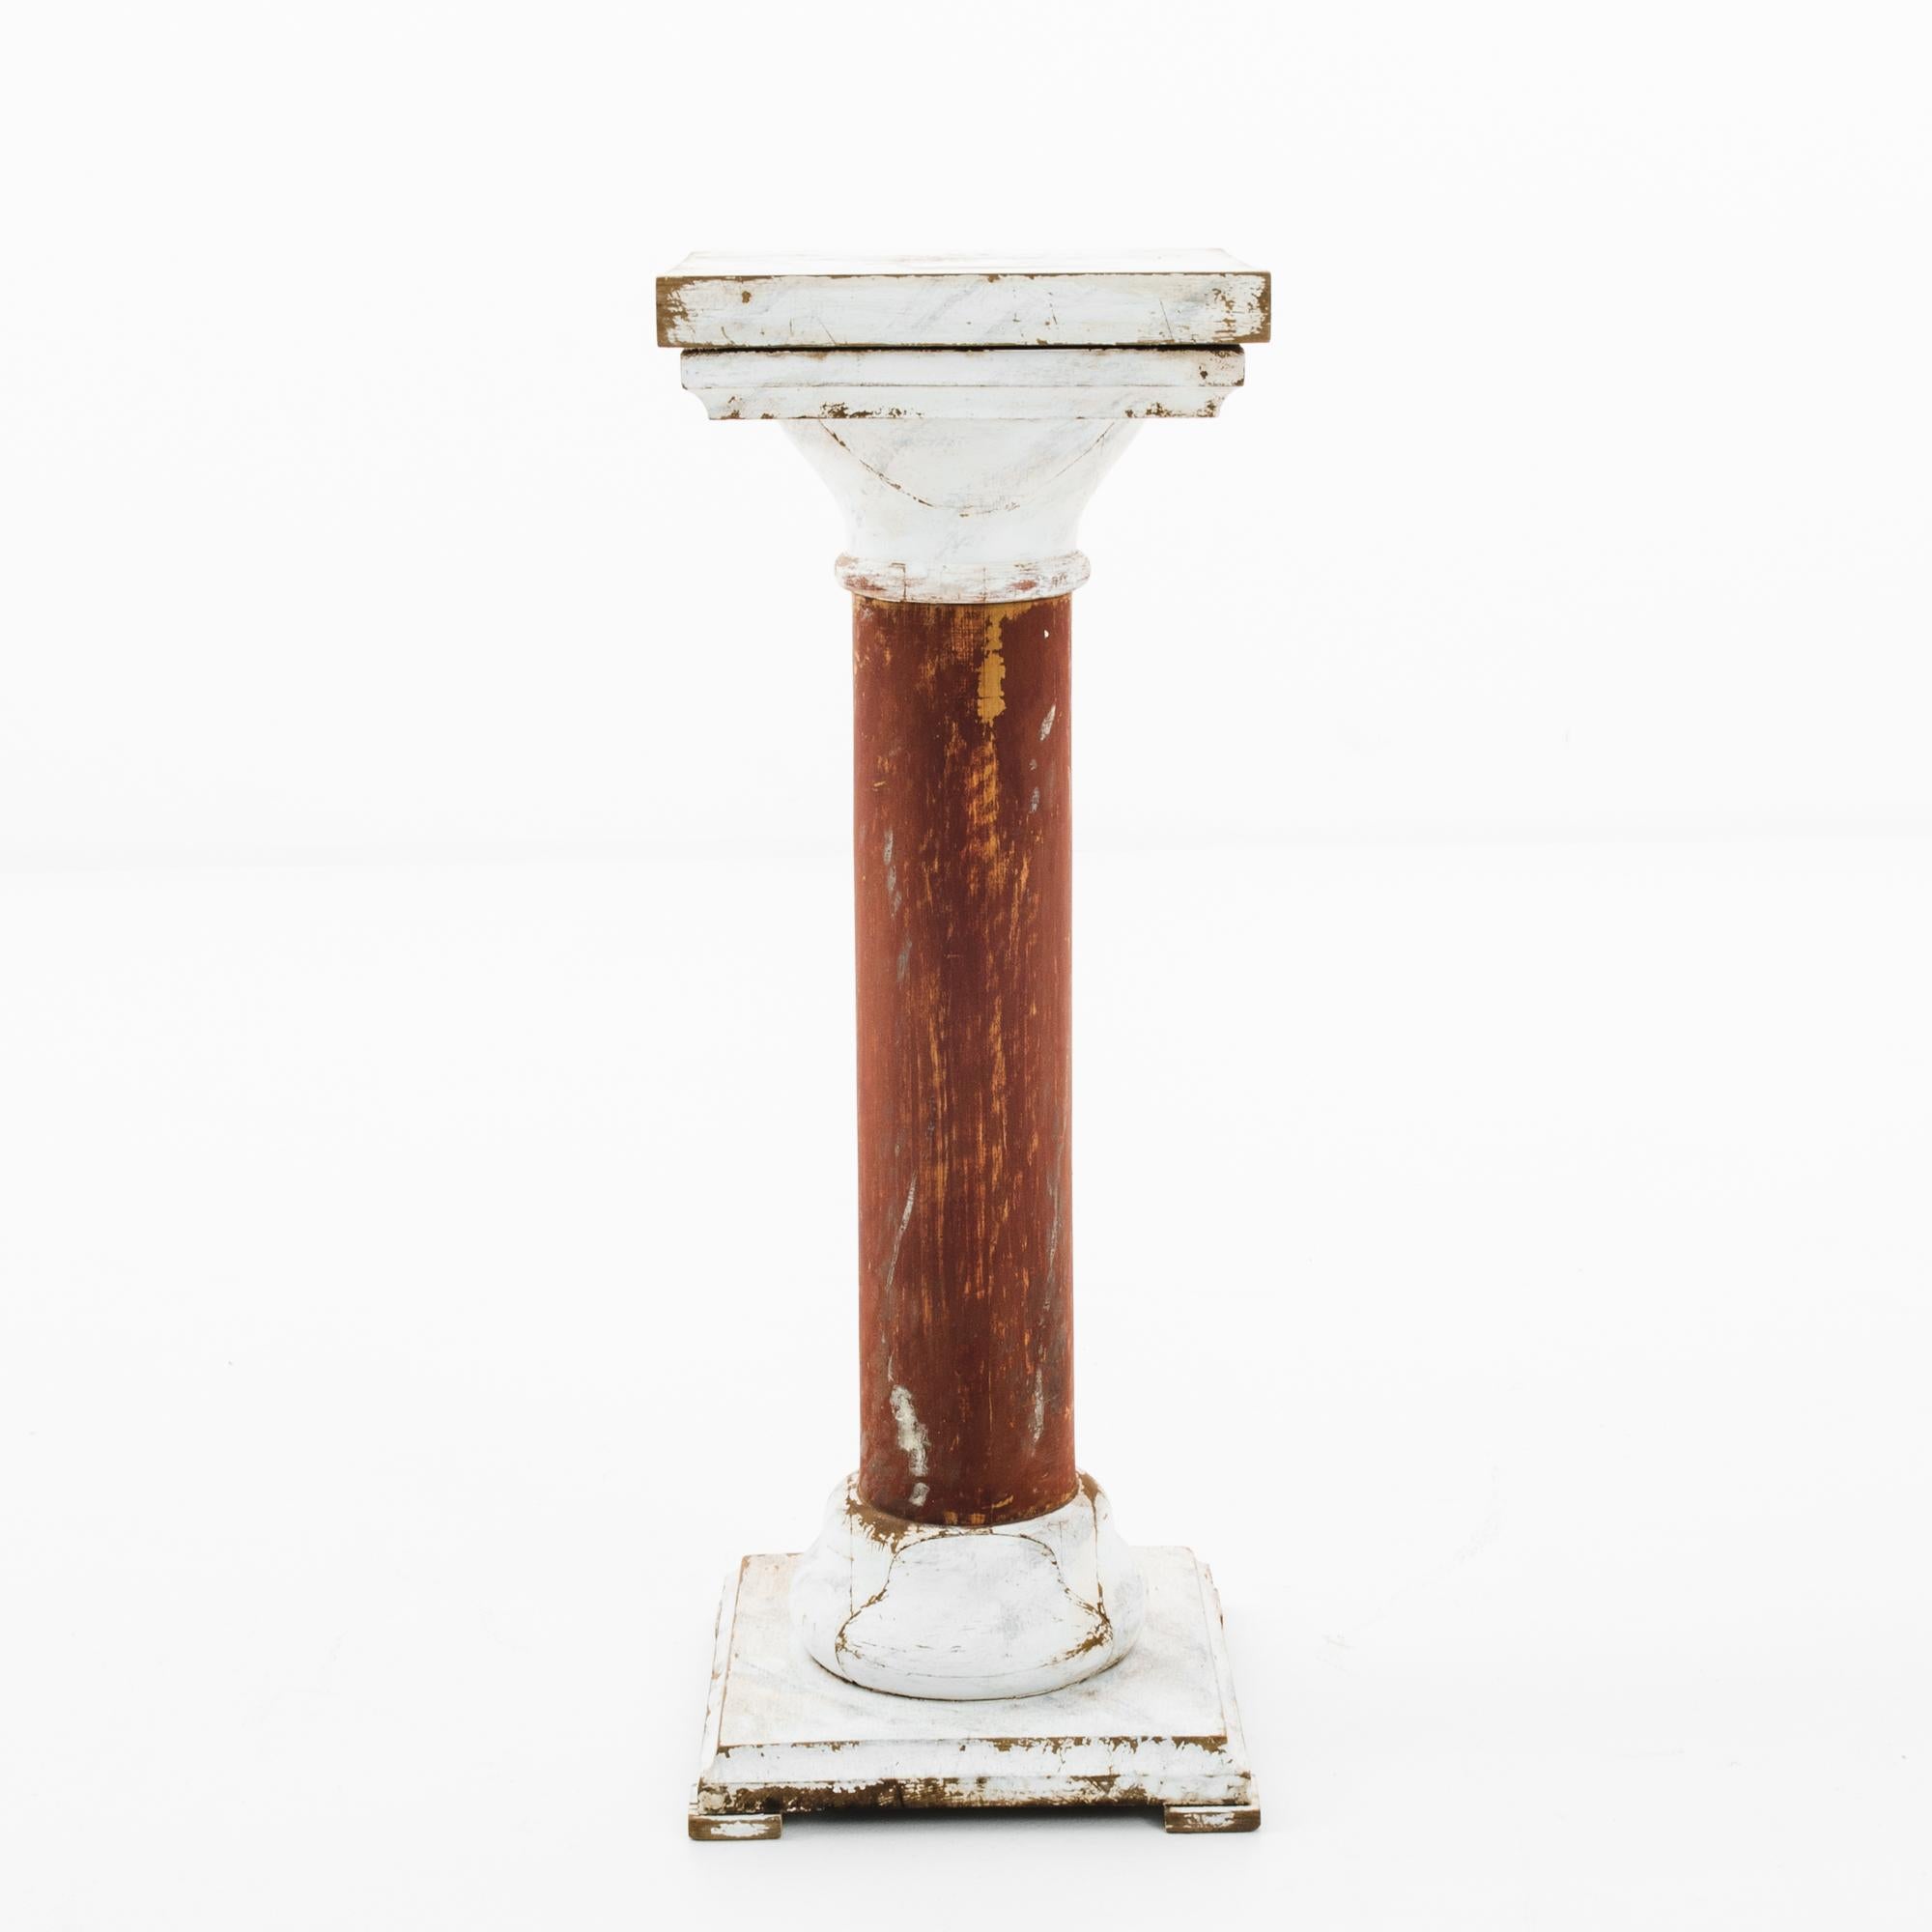 This antique wooden pedestal was made in France. It features a simple, cylindrical stand with a stepped top and base. With a seasoned white and umber patina offering a rustic elegance, this pedestal will imbue a French countrybambience to any space.